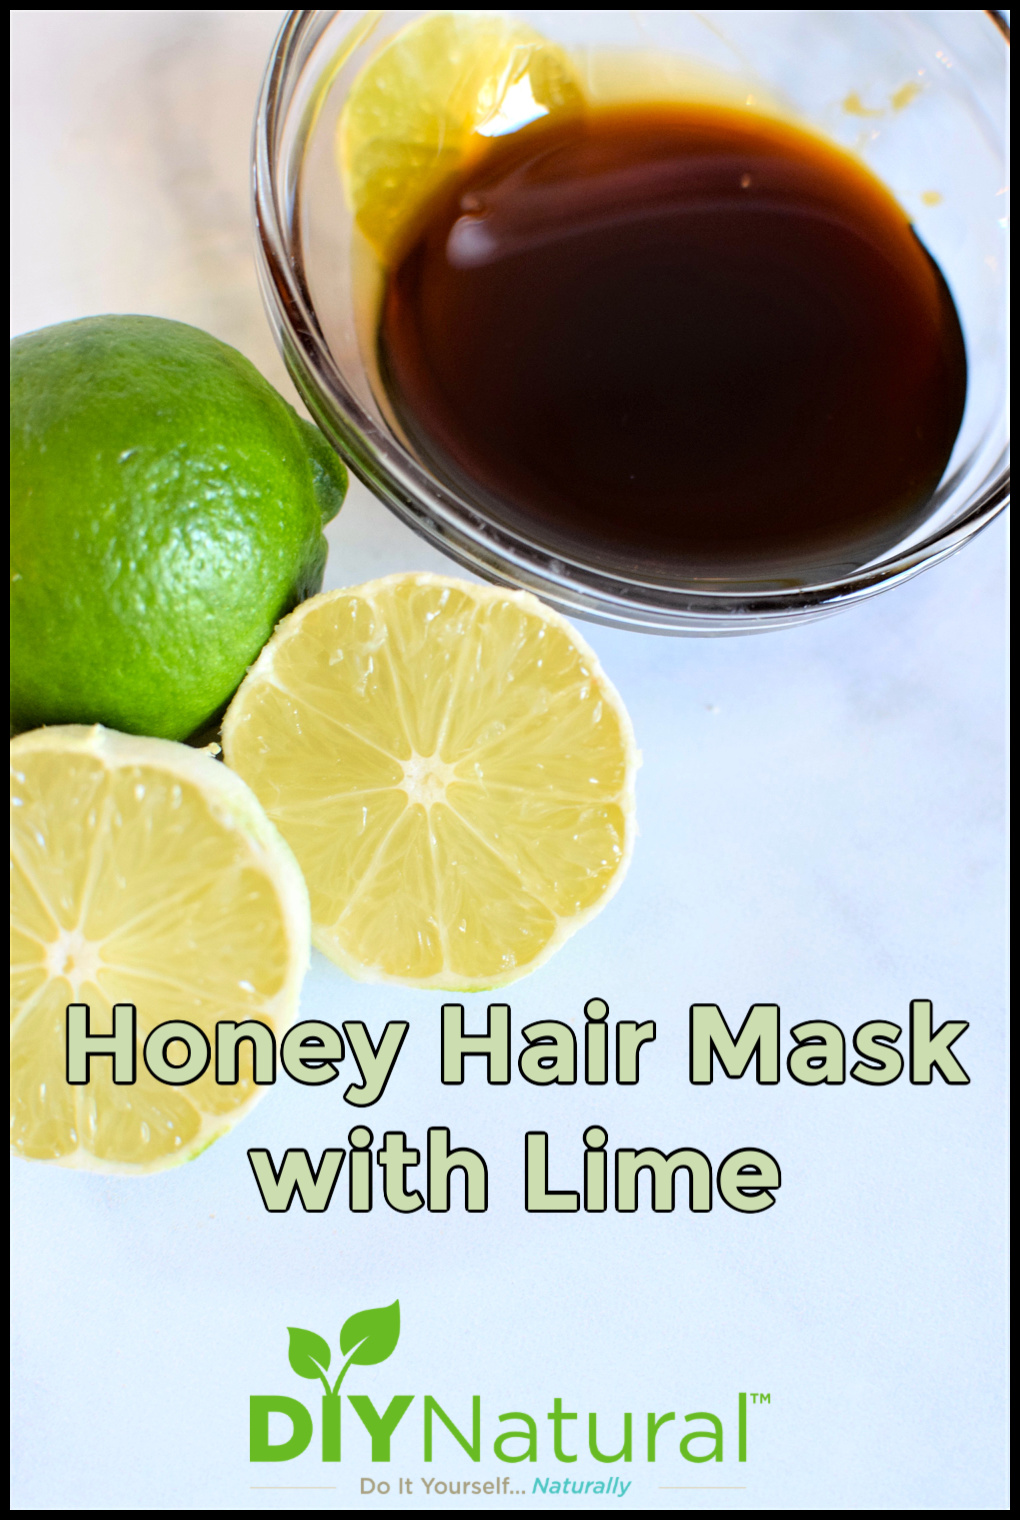 Honey Hair Mask: A DIY Hair Treatment Made with Honey and Lime